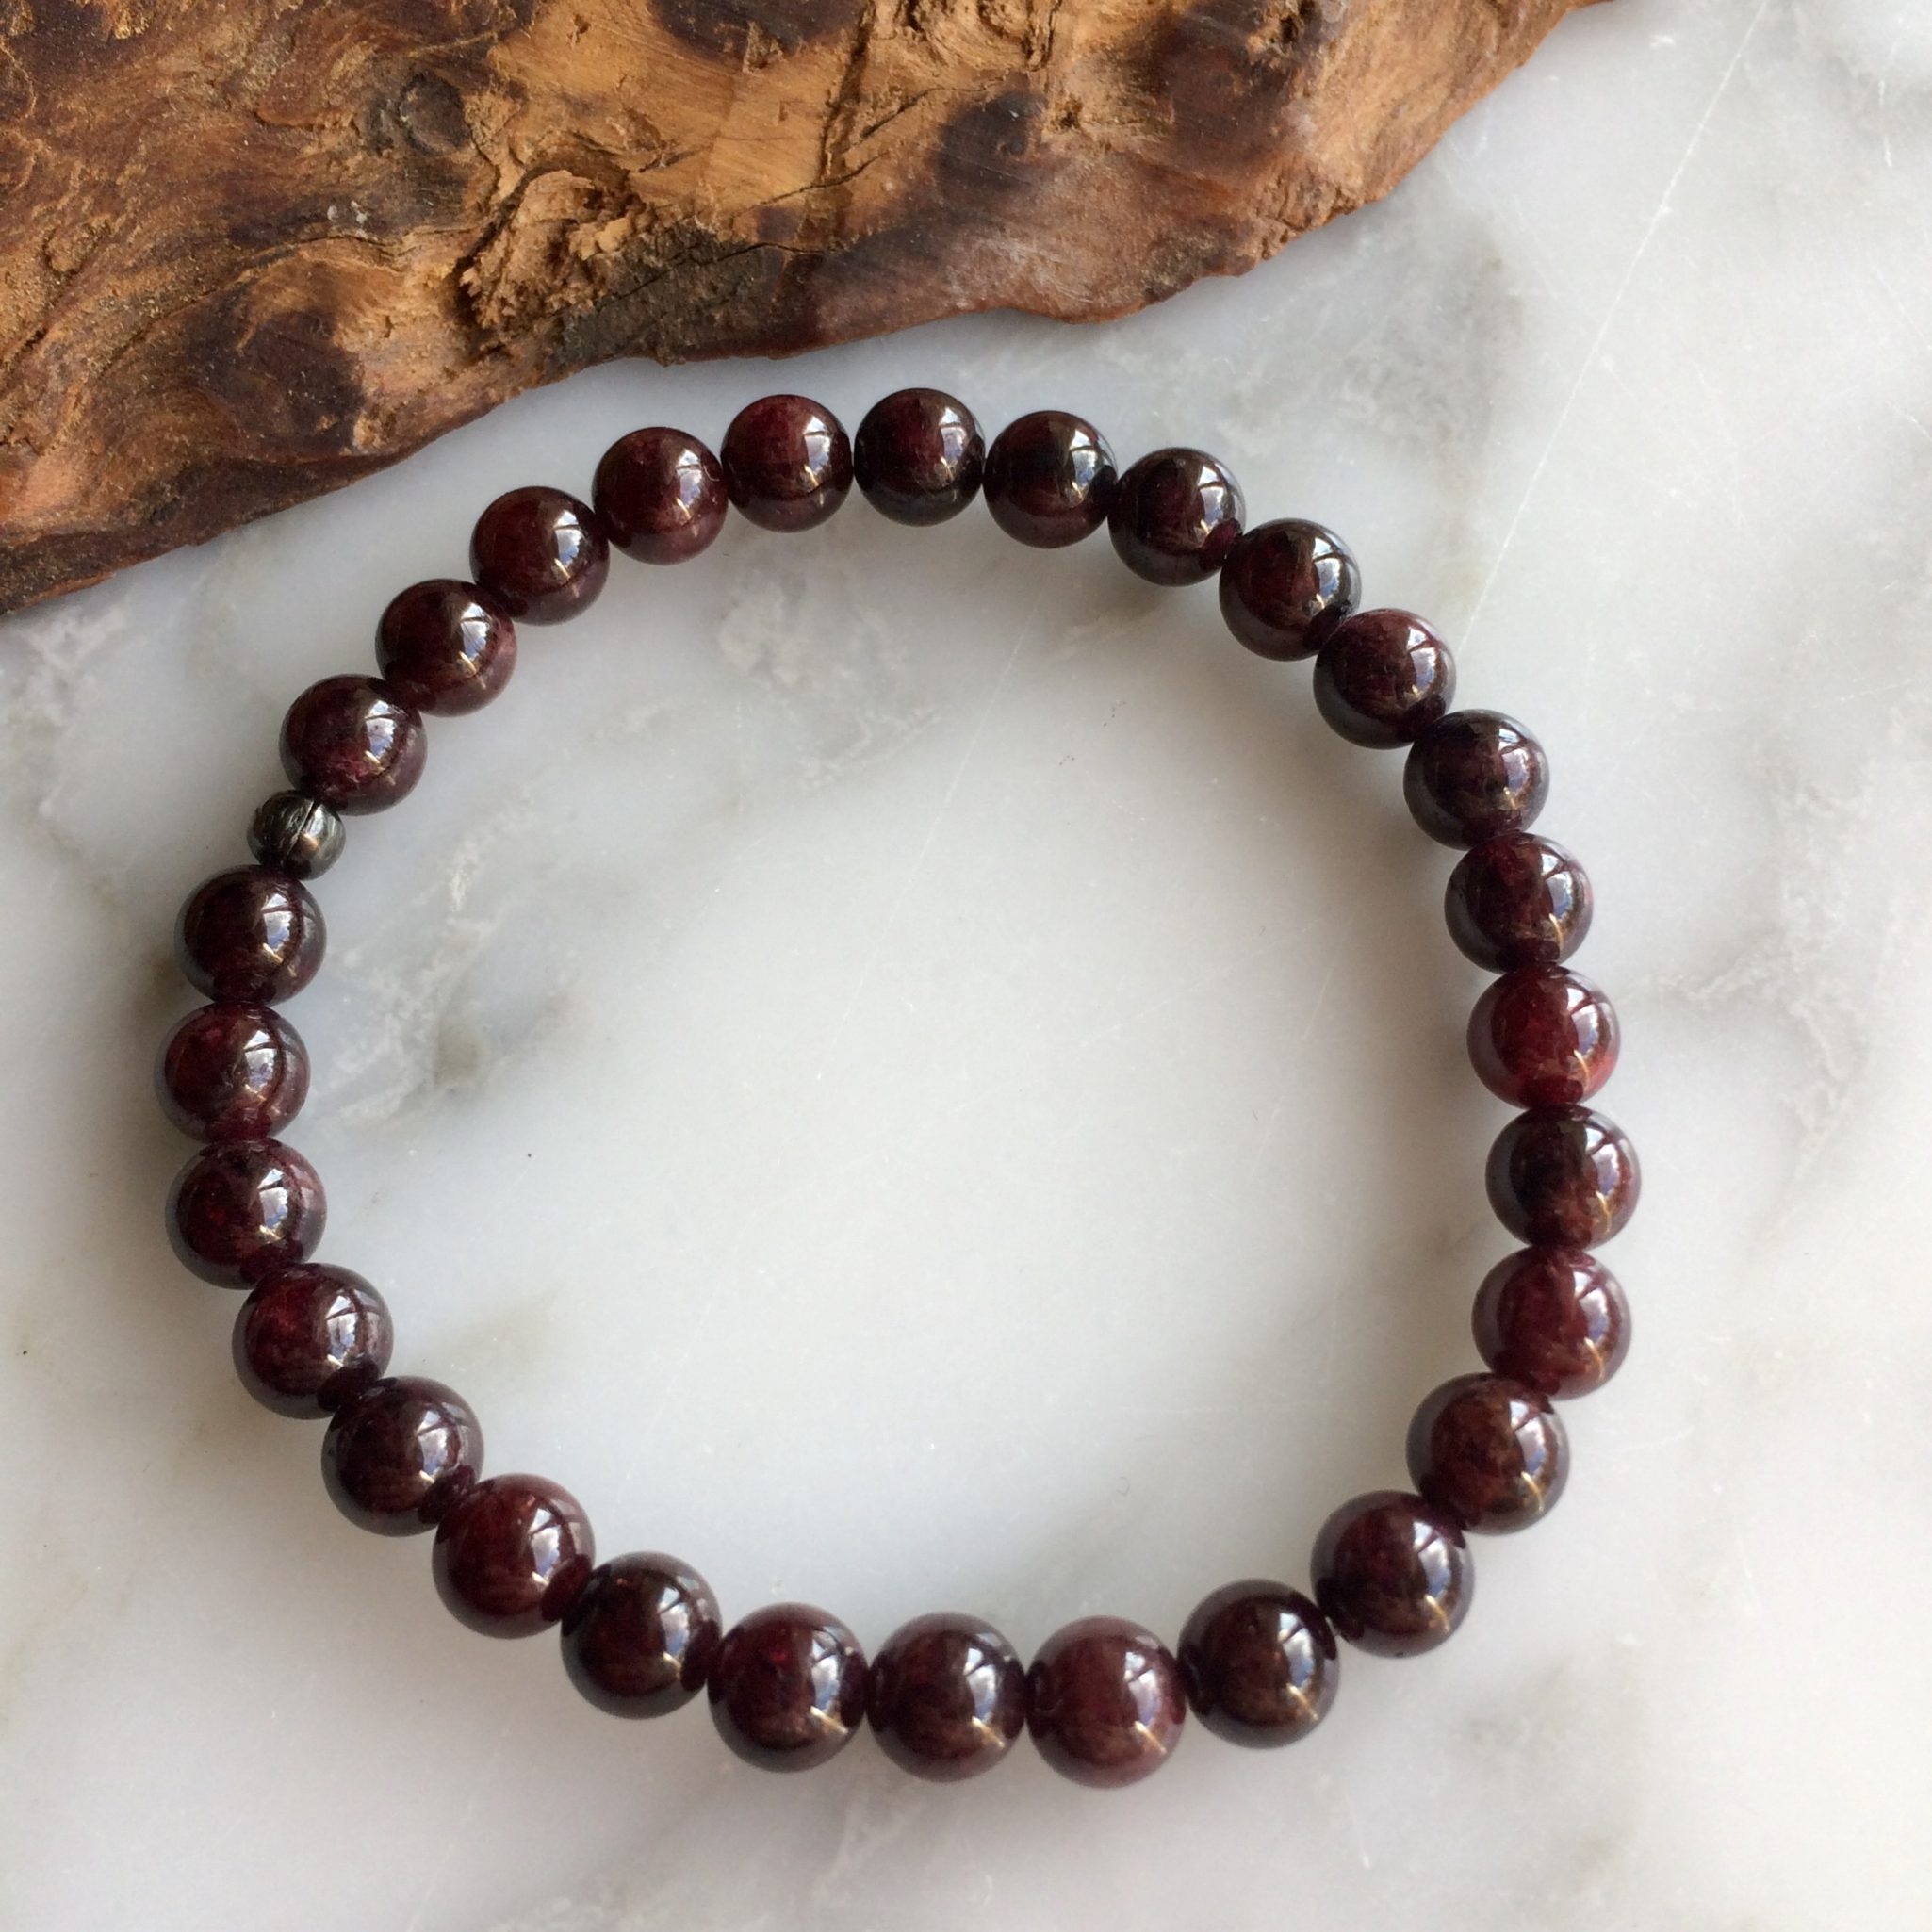 Garnet gemstone, Bracelet passion and commitment, Minera Emporium, Crystal and mineral shop, 2050x2050 HD Handy